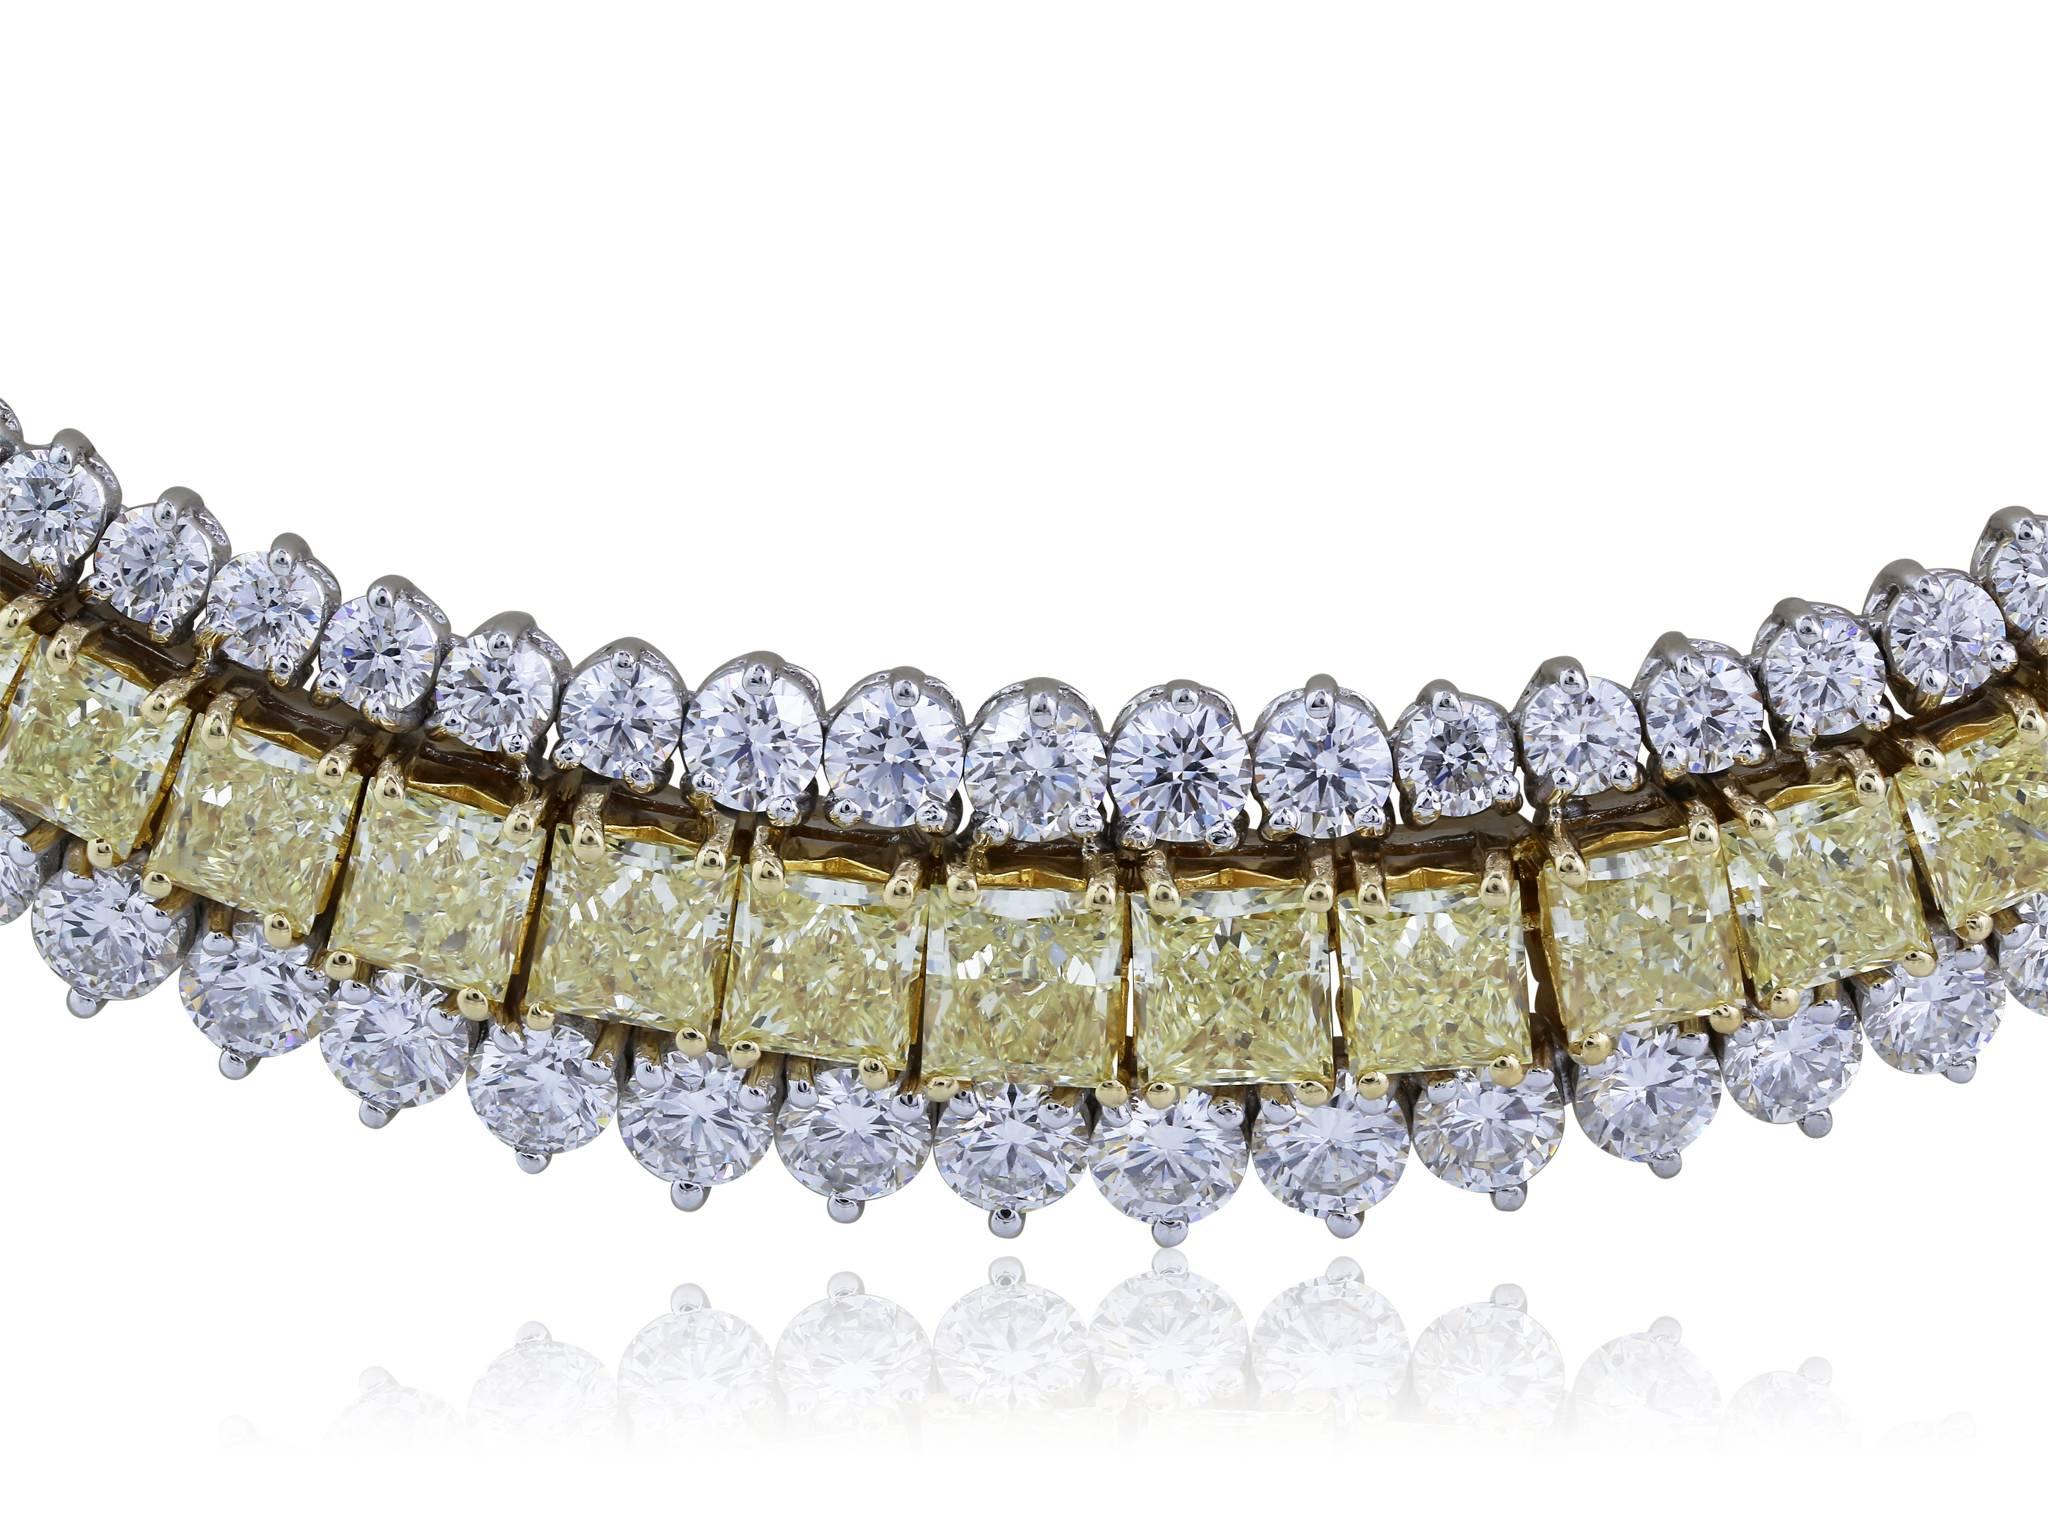 Platinum and 18 karat yellow gold collar necklace featuring a graduated row of 53 radiant cut natural canary diamonds, weighing 14.46 carats, flanked by two rows of round brilliant cut diamonds with a total carat weight of 23.57 carats.